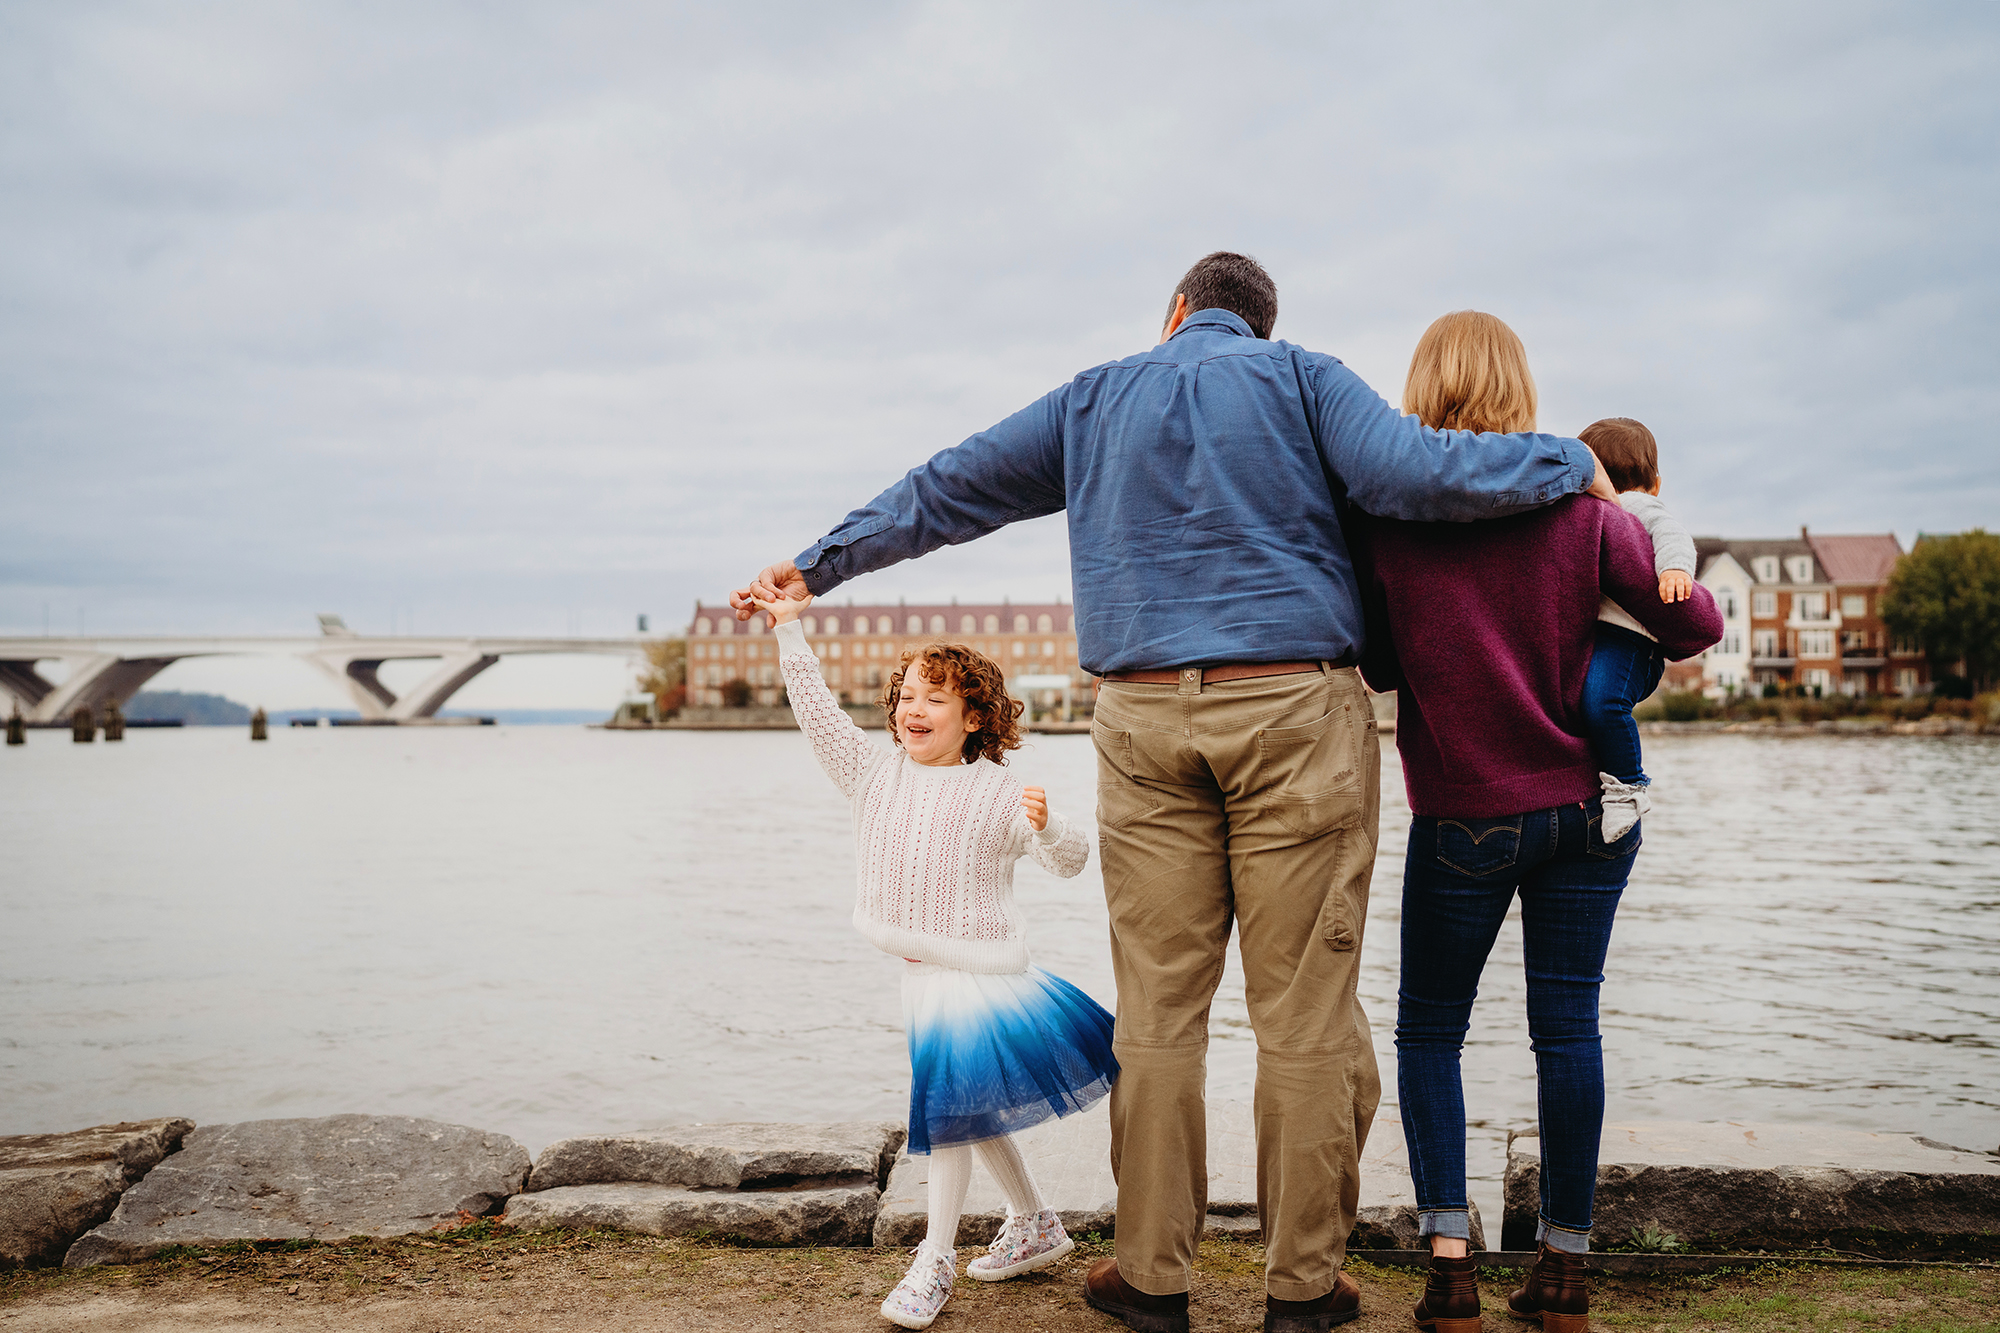 As the family faces the waterfront, a little girl twirls in a blue skirt captured by Denver family photographers